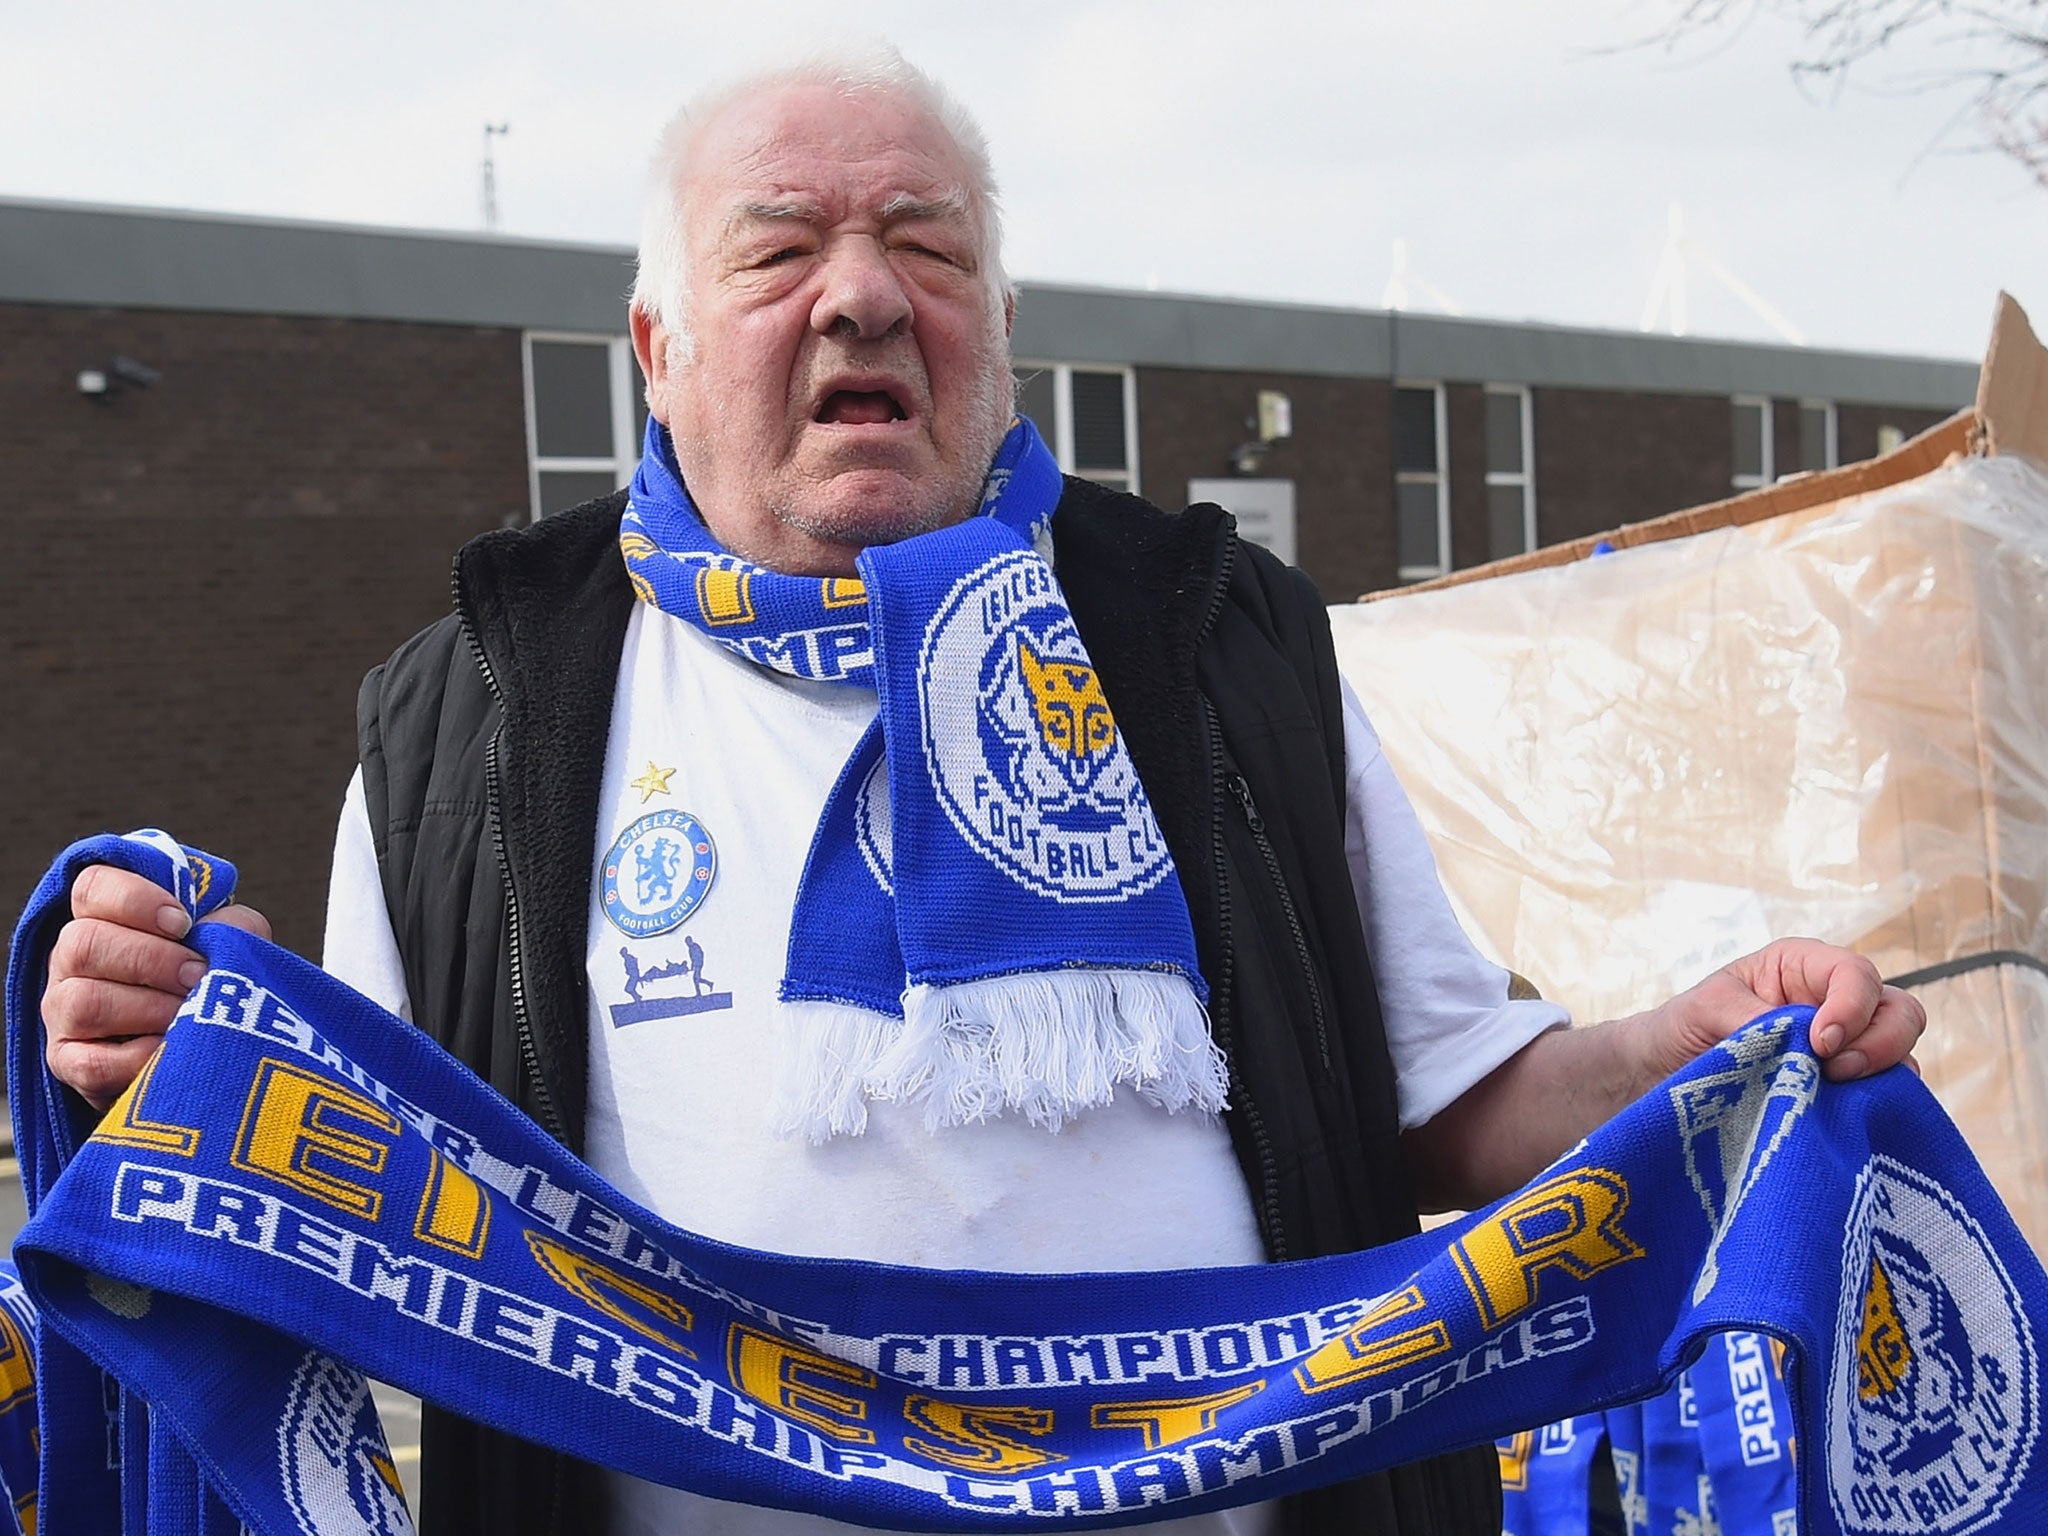 Scarves reading 'Leicester City Premiership Champions' being sold